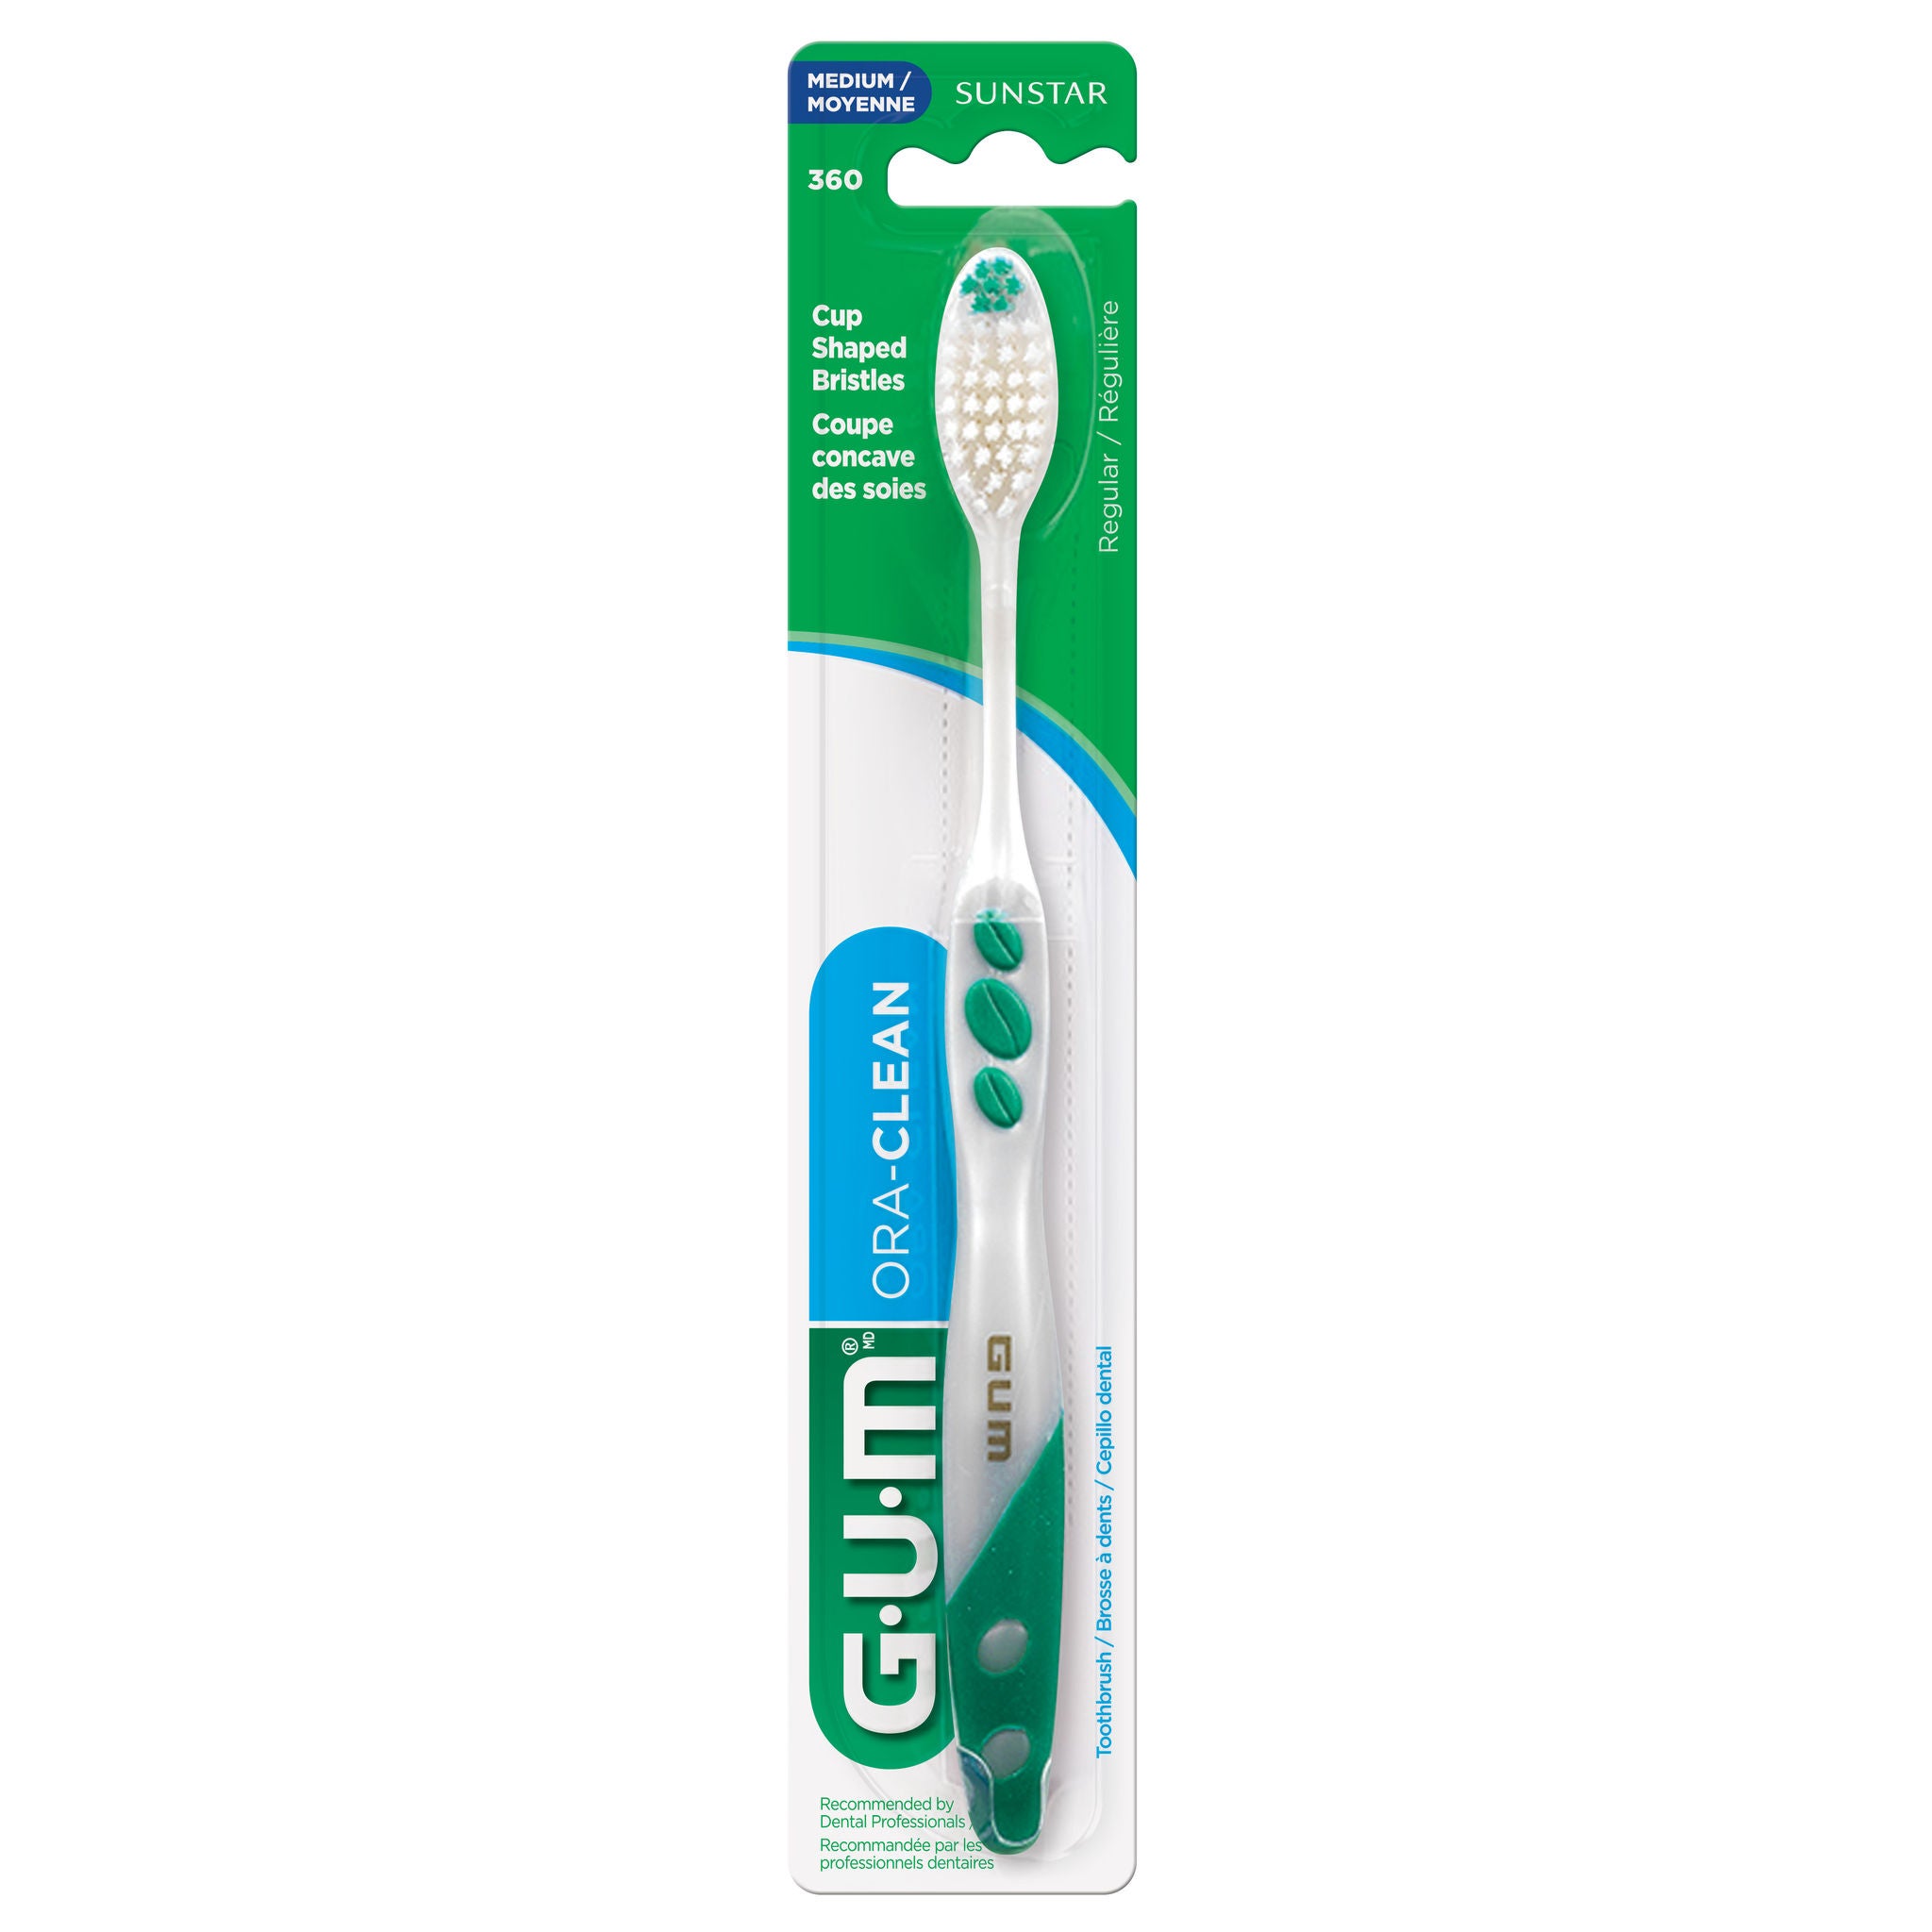 360RY-Product-Packaging-Toothbrush-OraClean-front-Green-1ct.jpg